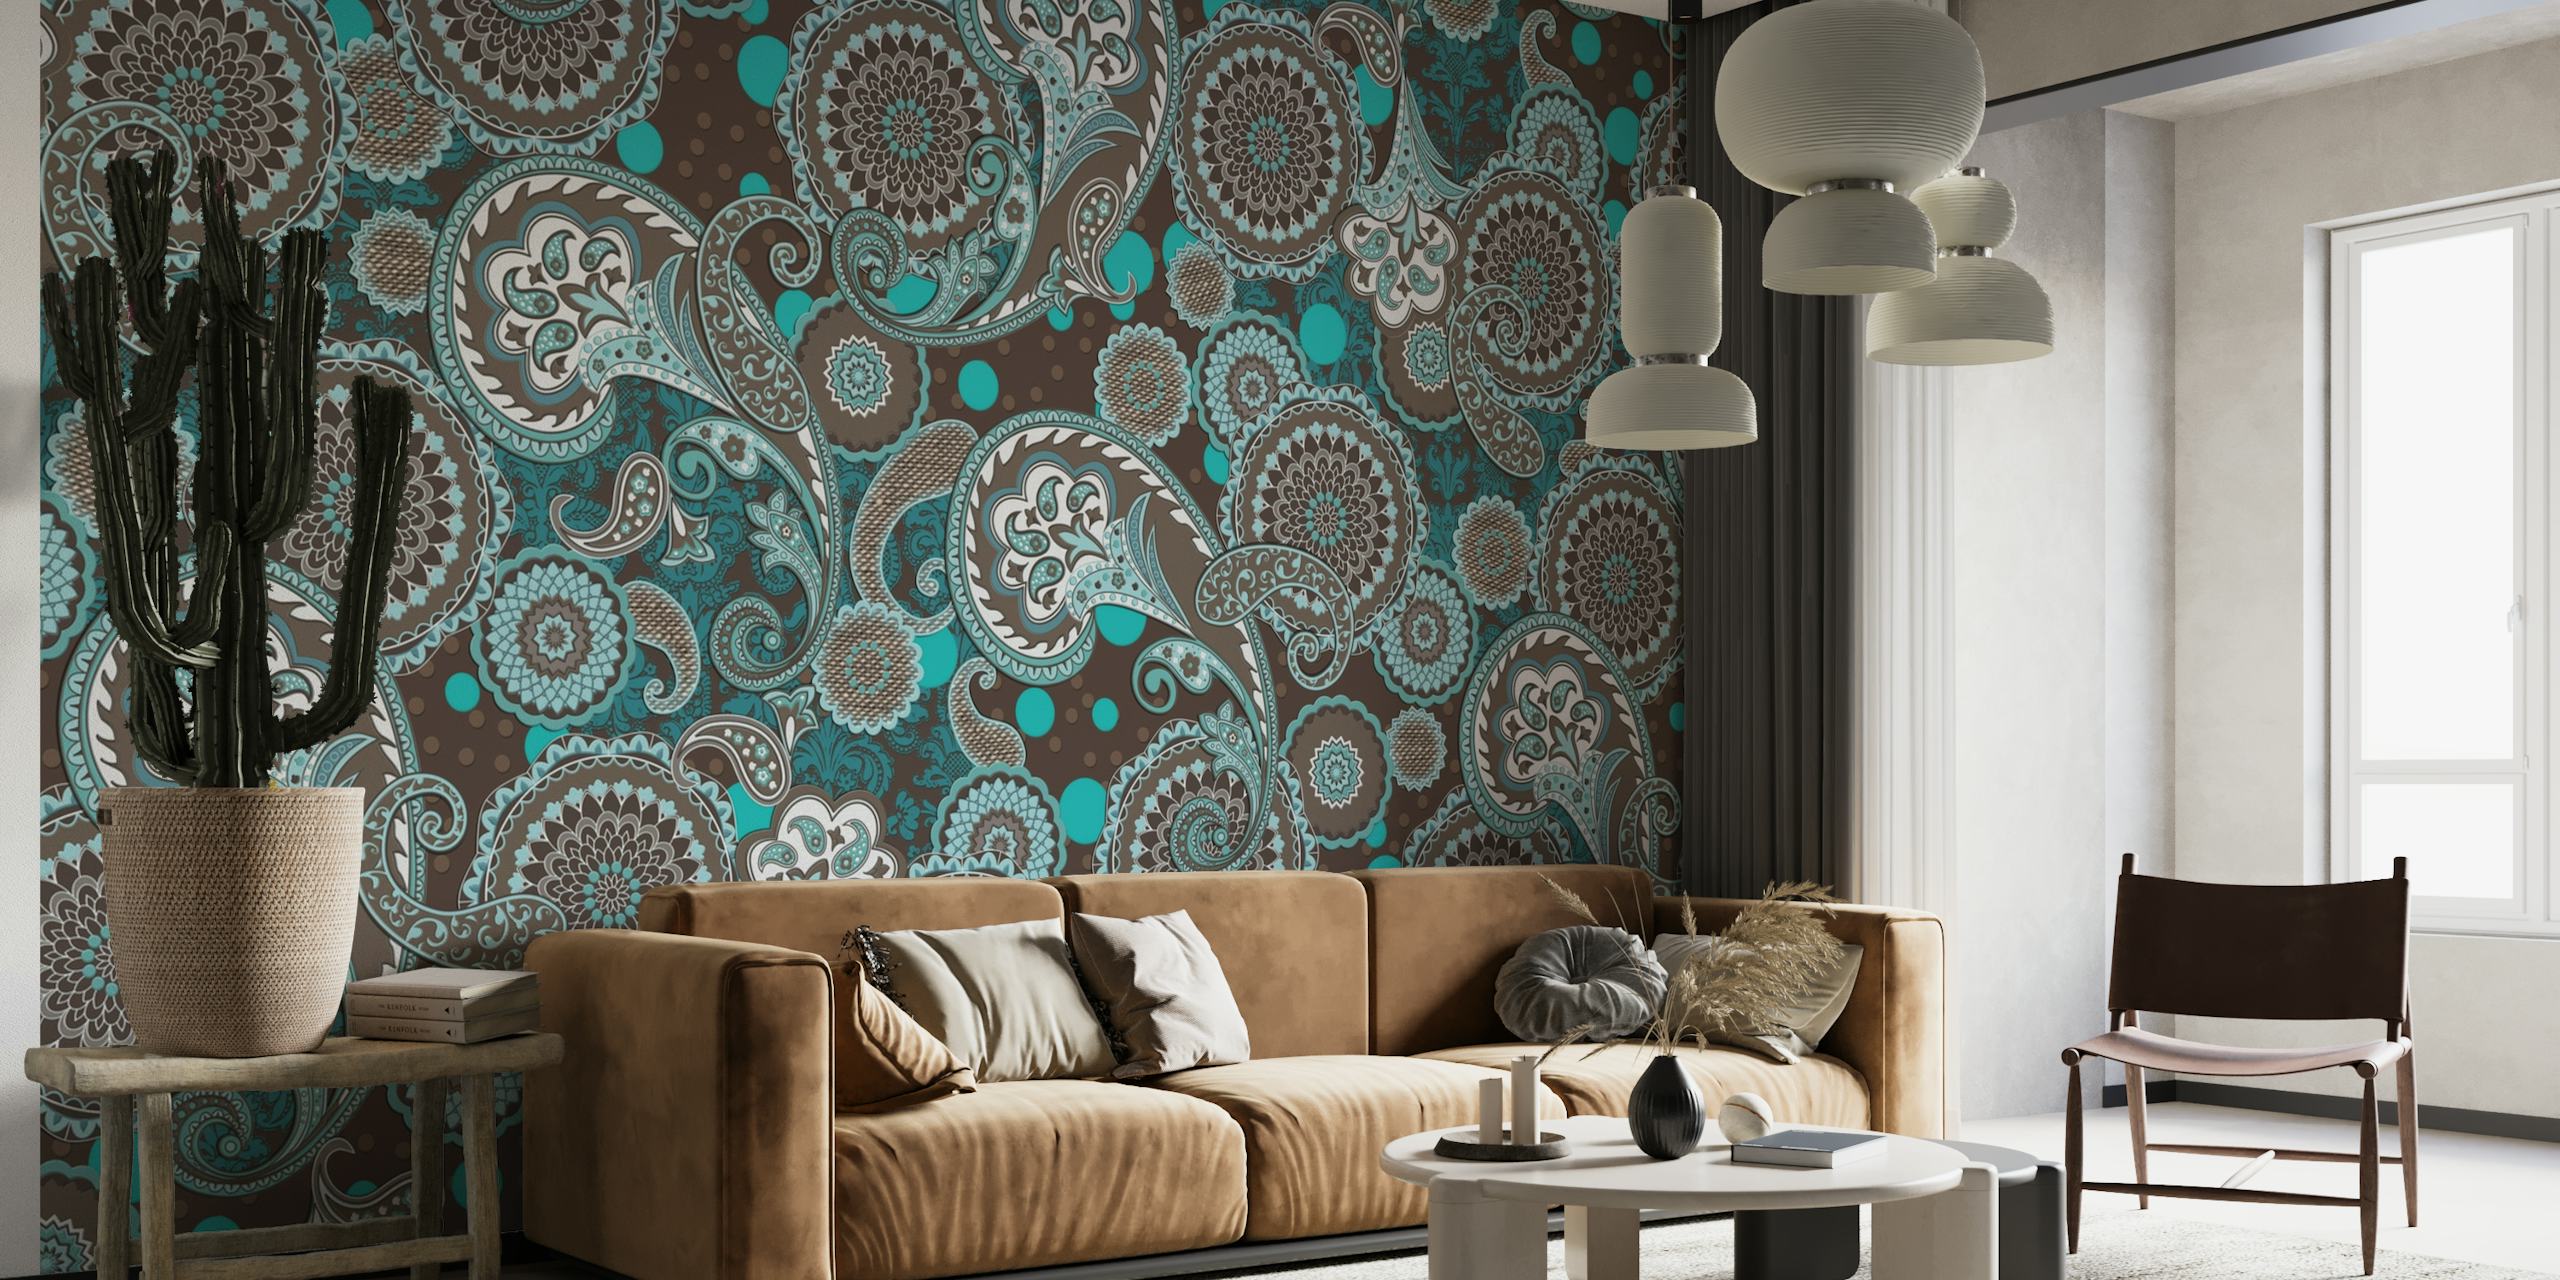 Paisley Mandala blue brown wall mural with intricate patterns